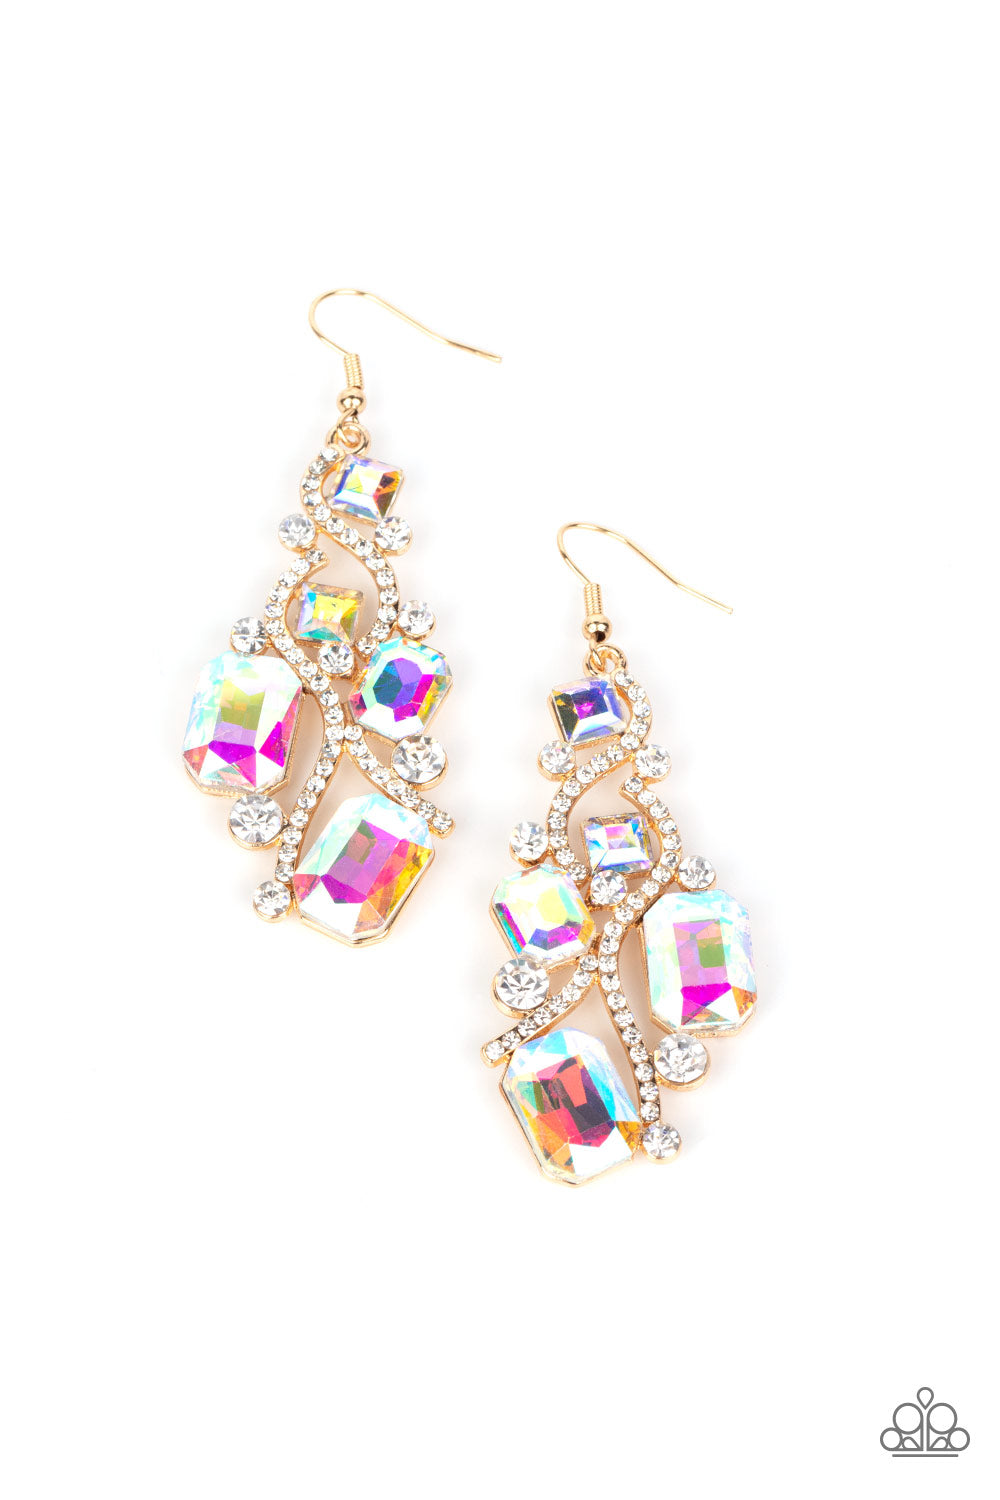 Paparazzi Interstellar Illumination - Multi Earrings - December 2021 Life Of The Party Exclusive - A Finishing Touch Jewelry